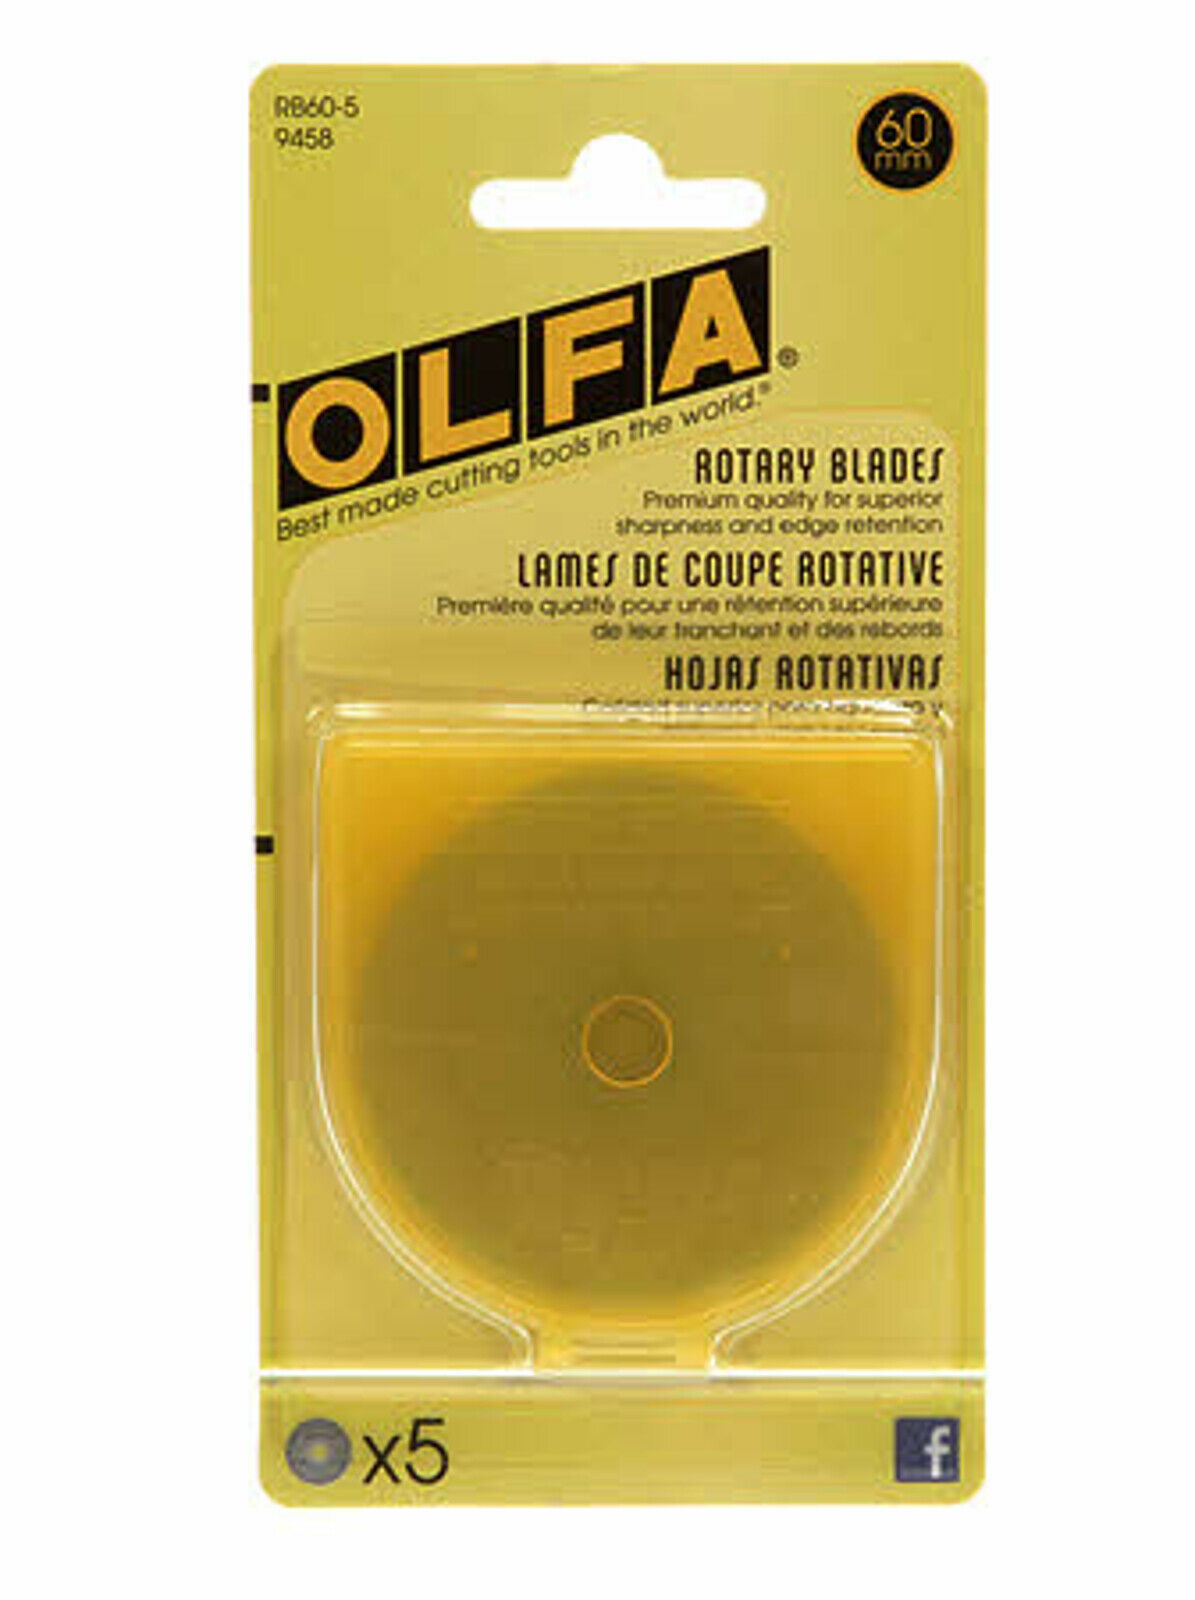 OLFA 60mm Replacement Rotary Blade RB60-5  RTY3 - $67.46